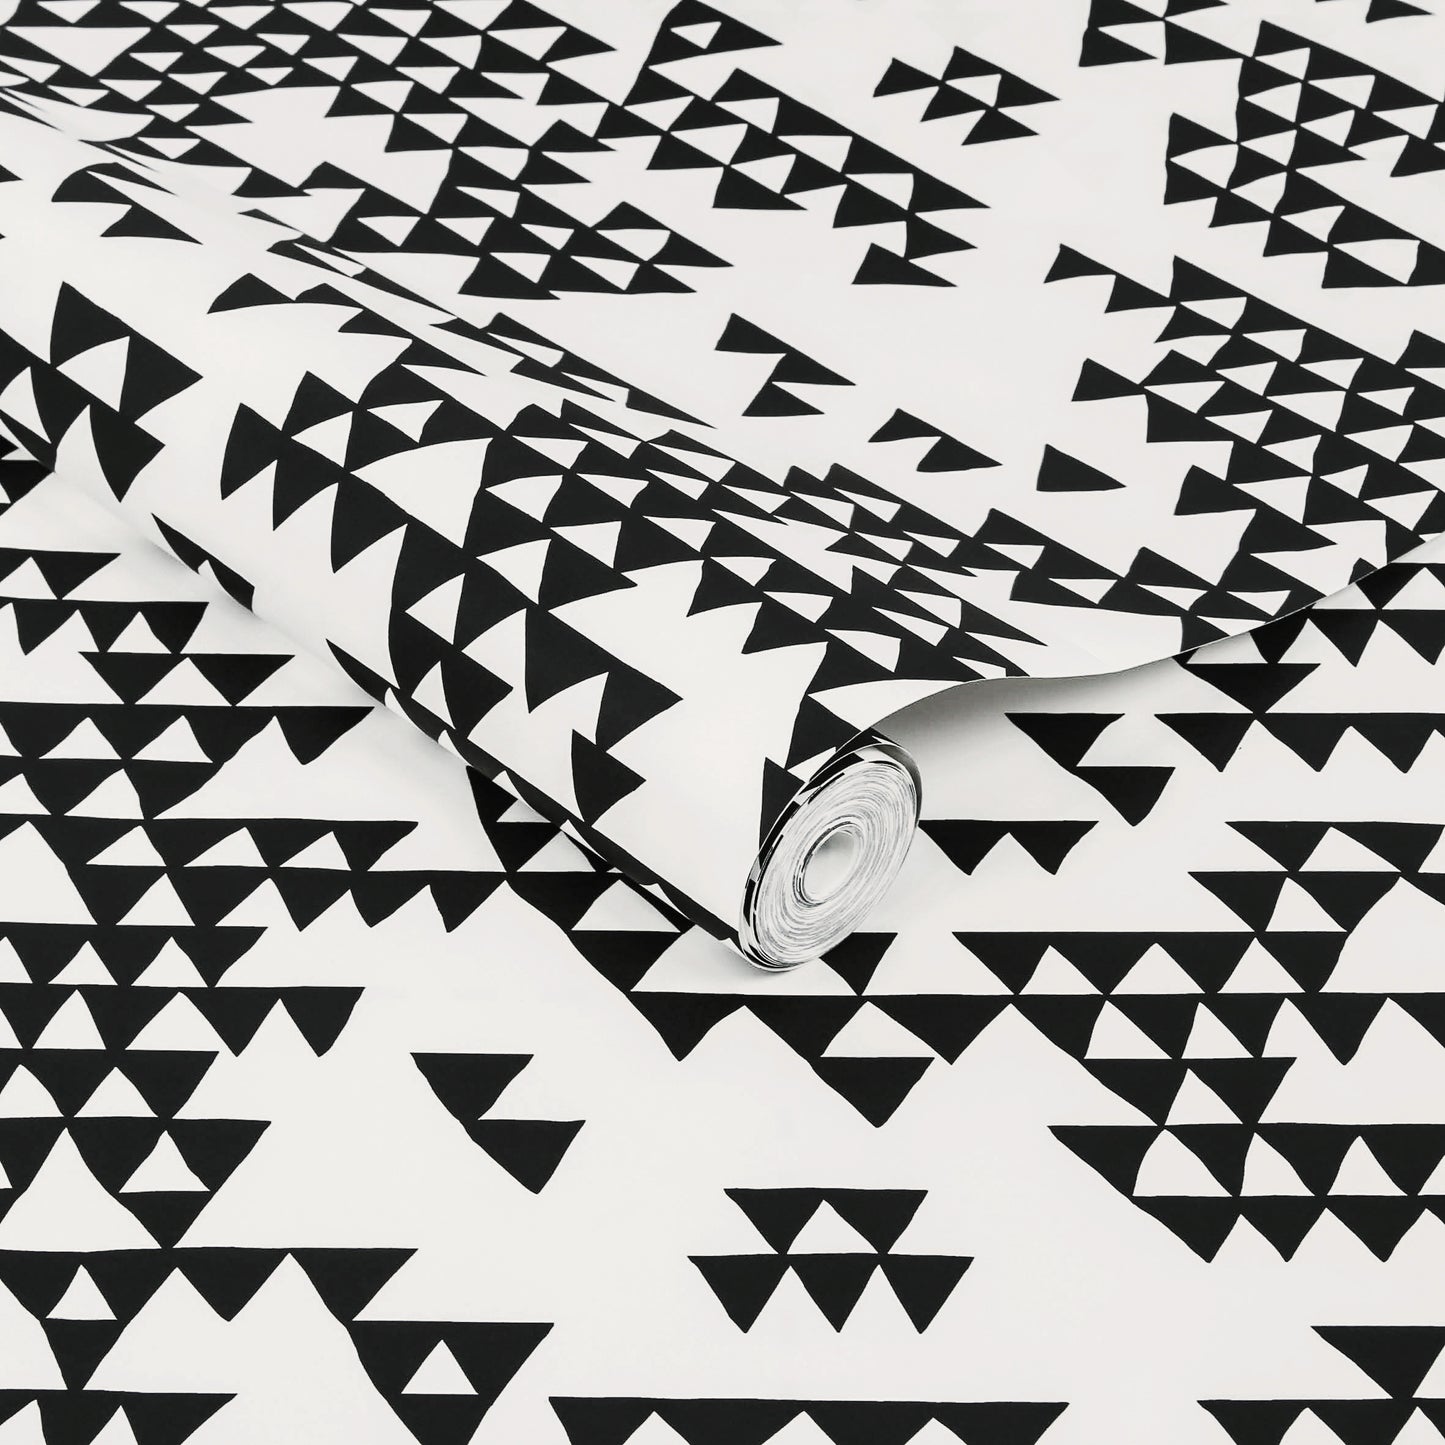 Acquire Graham & Brown Wallpaper Secret Mountain Black and White Removable Wallpaper_3